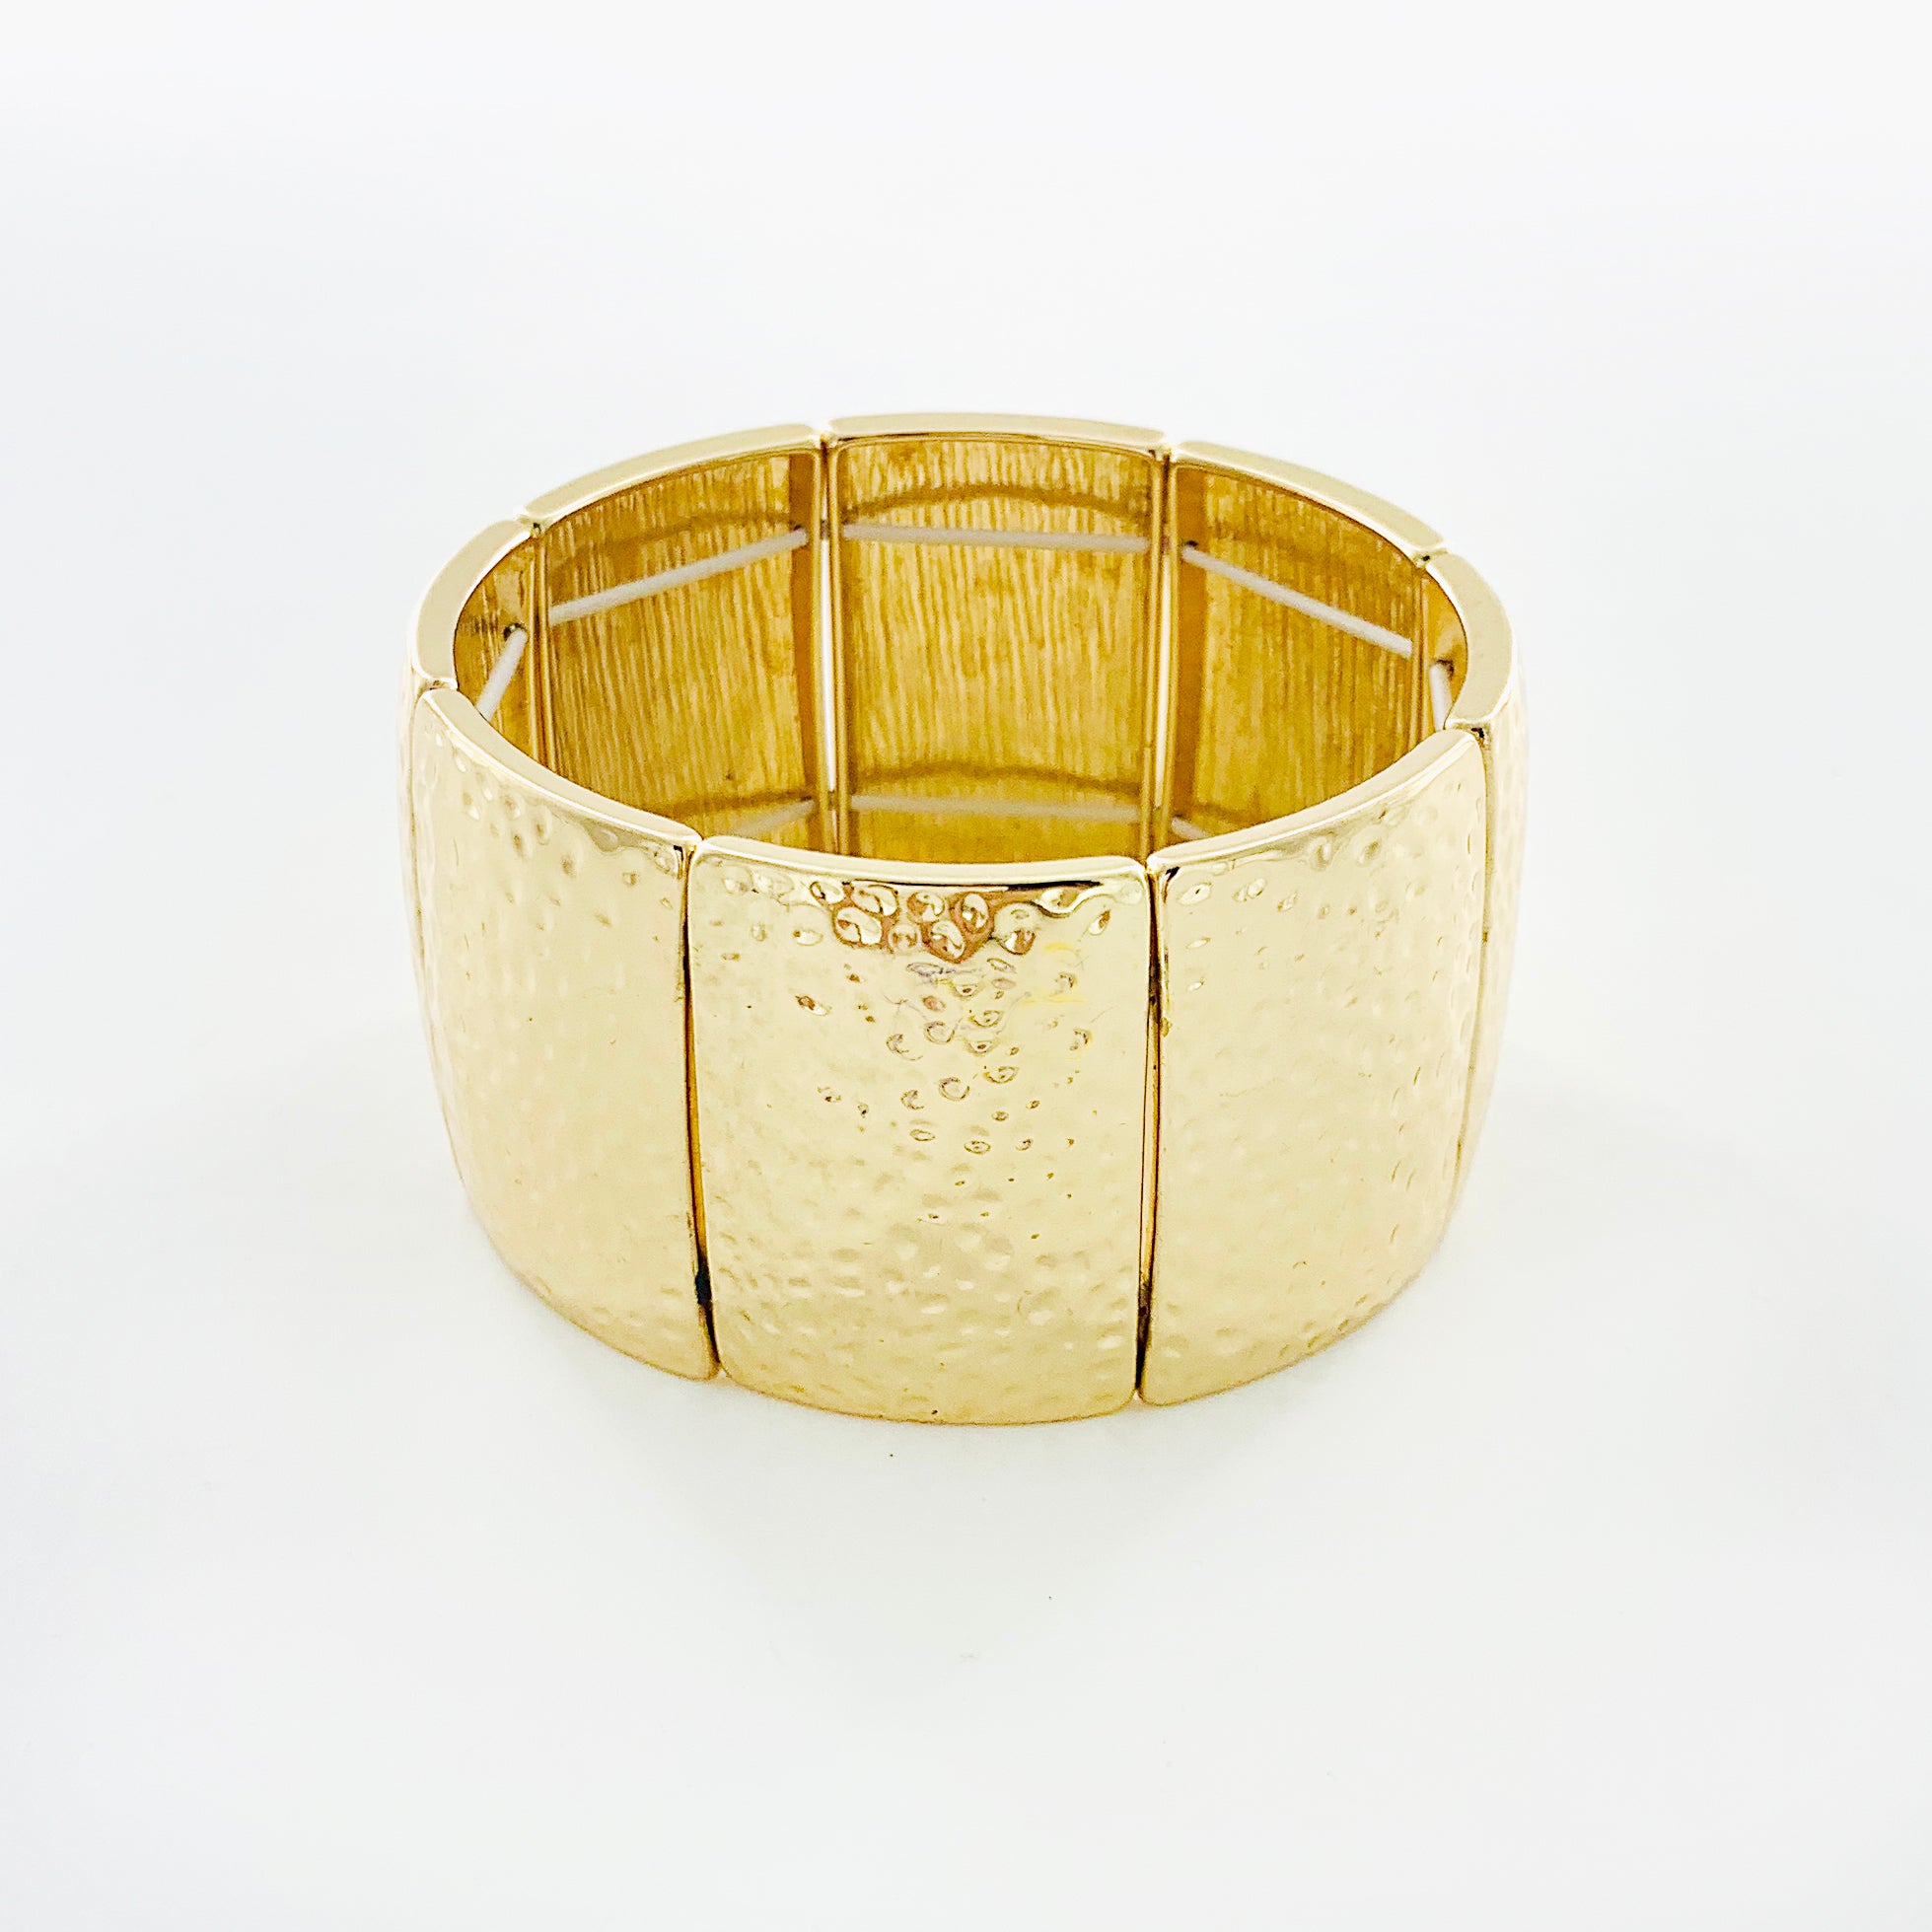 Gold elastic cuff with textured gold panels